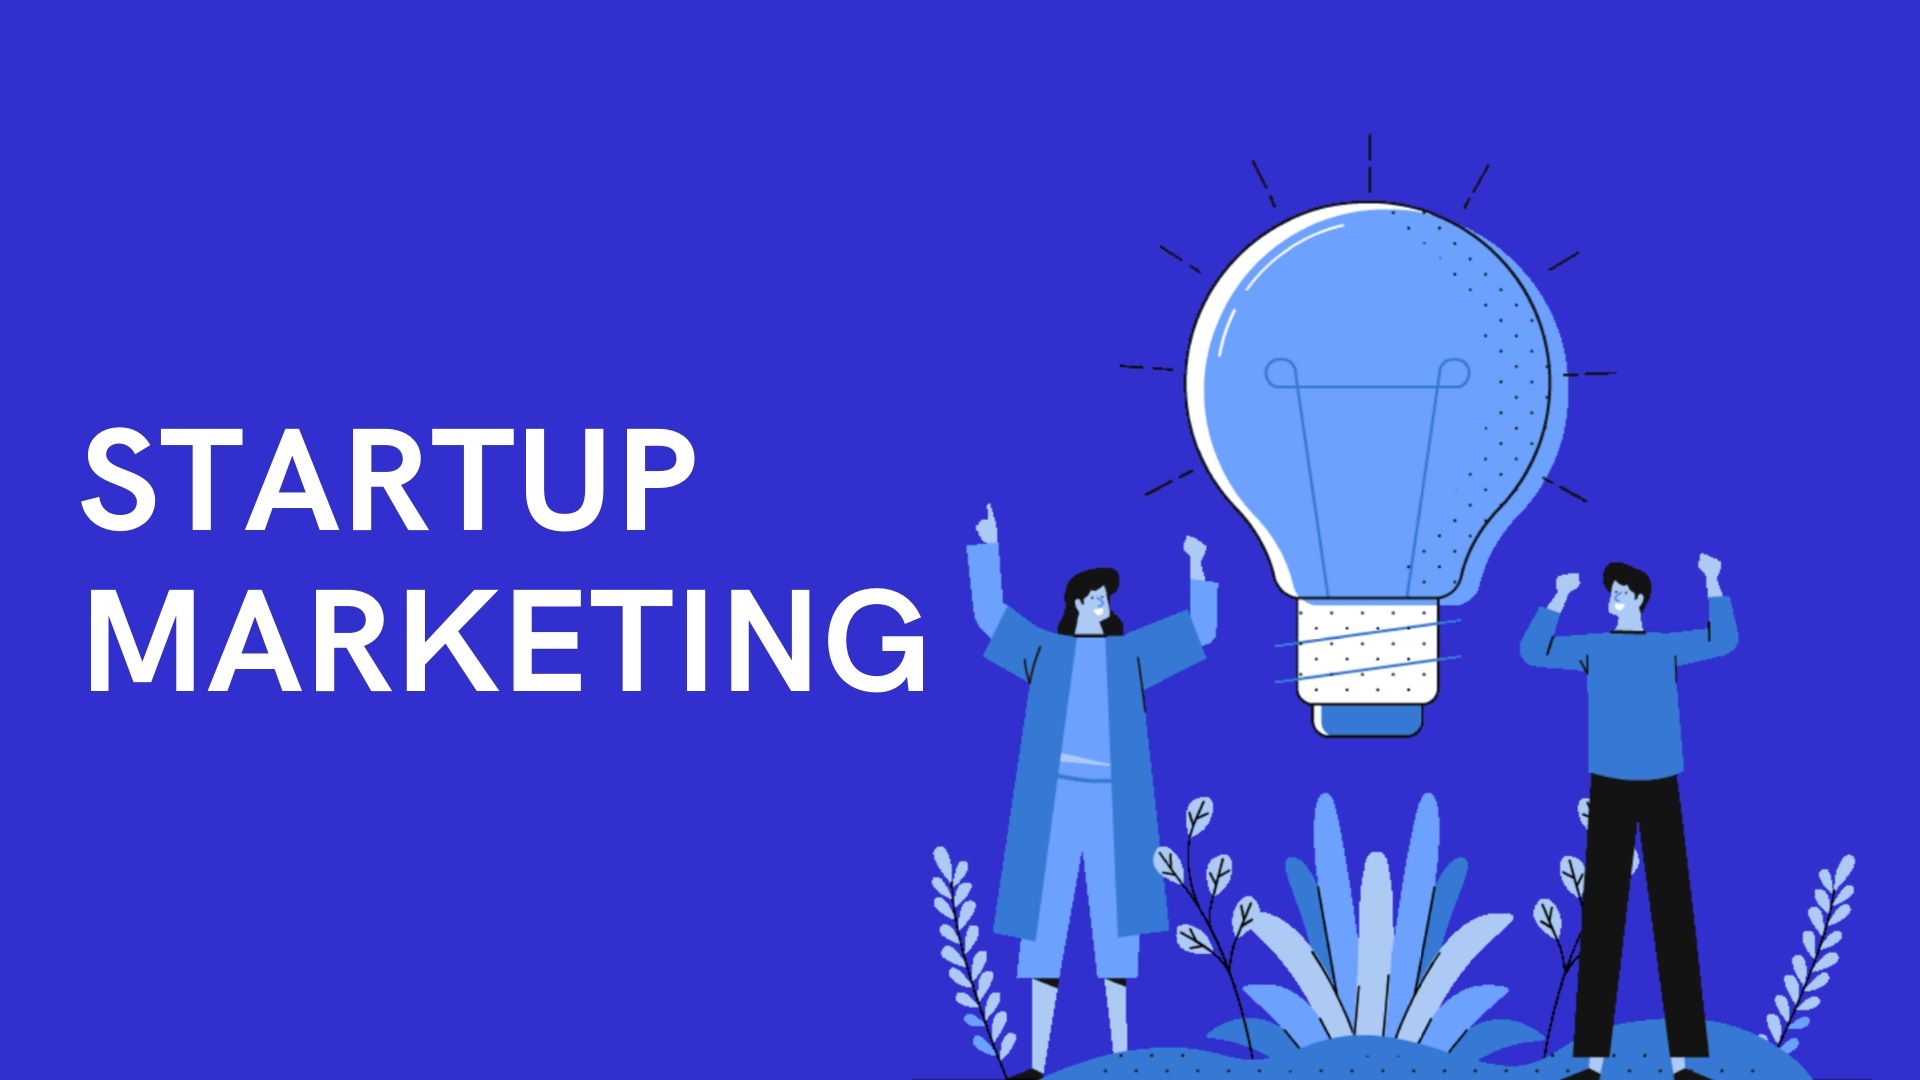 startup marketing consultant services, startup marketing consultant, startup consulting agencies in india, startup consulting firms in india, startup business consultant companies, startup business consultant india, startup consultants in india, startup consultants agencies in india, startup consultancy in india, best startup consultants in india, marketing consultant for startups, business startup consultants in mumbai, startup marketing consulting, startup consultants in mumbai